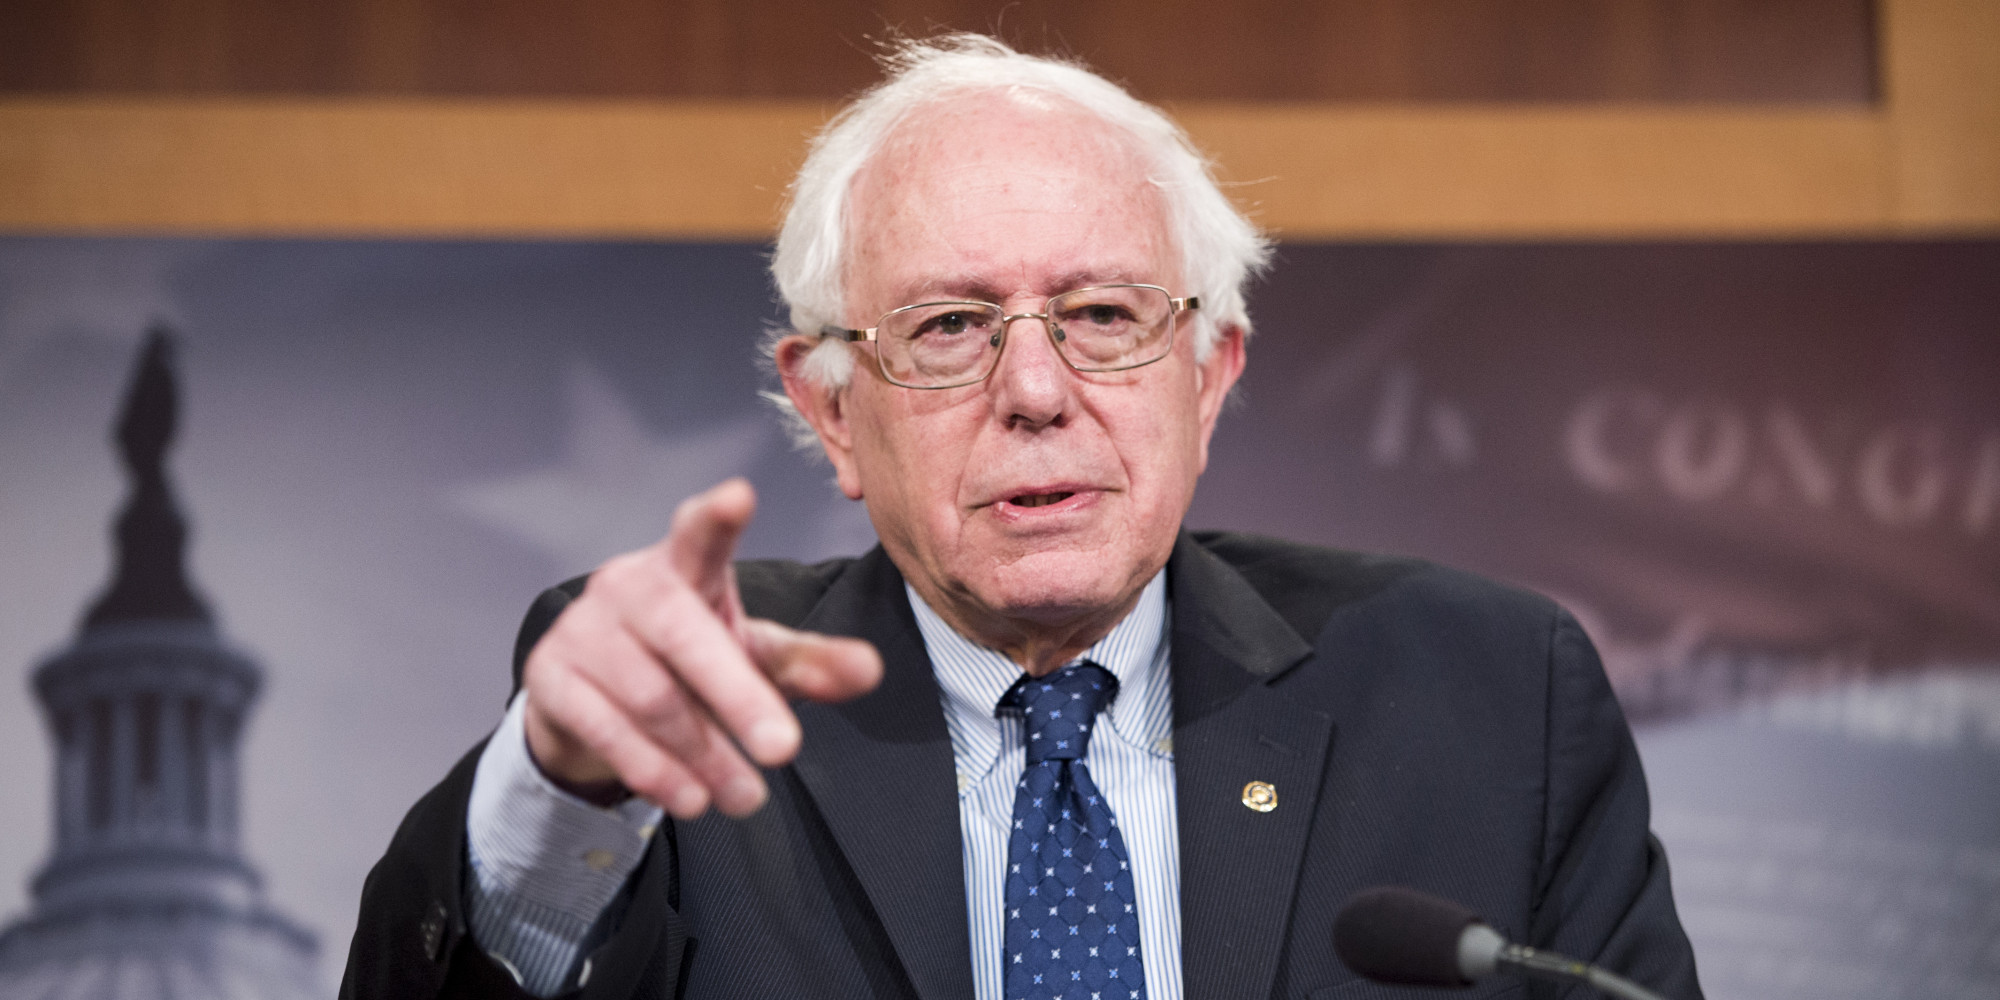 Video: Bernie Sanders: Long Overdo to Remove Federal Prohibition on Cannabis